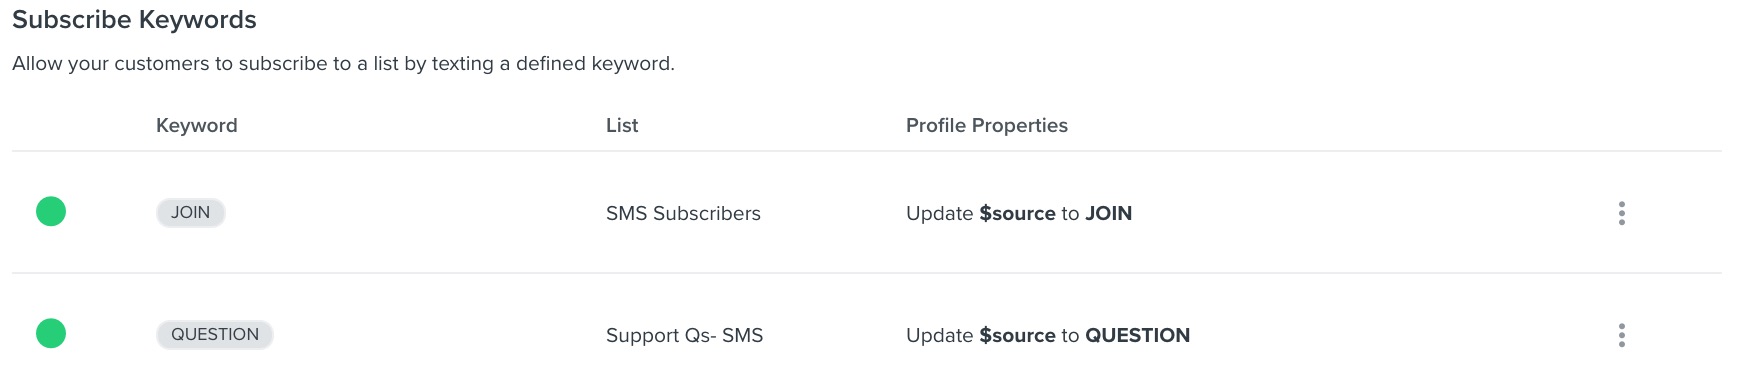 Subscribe keywords section, showing the newly created keyword for support